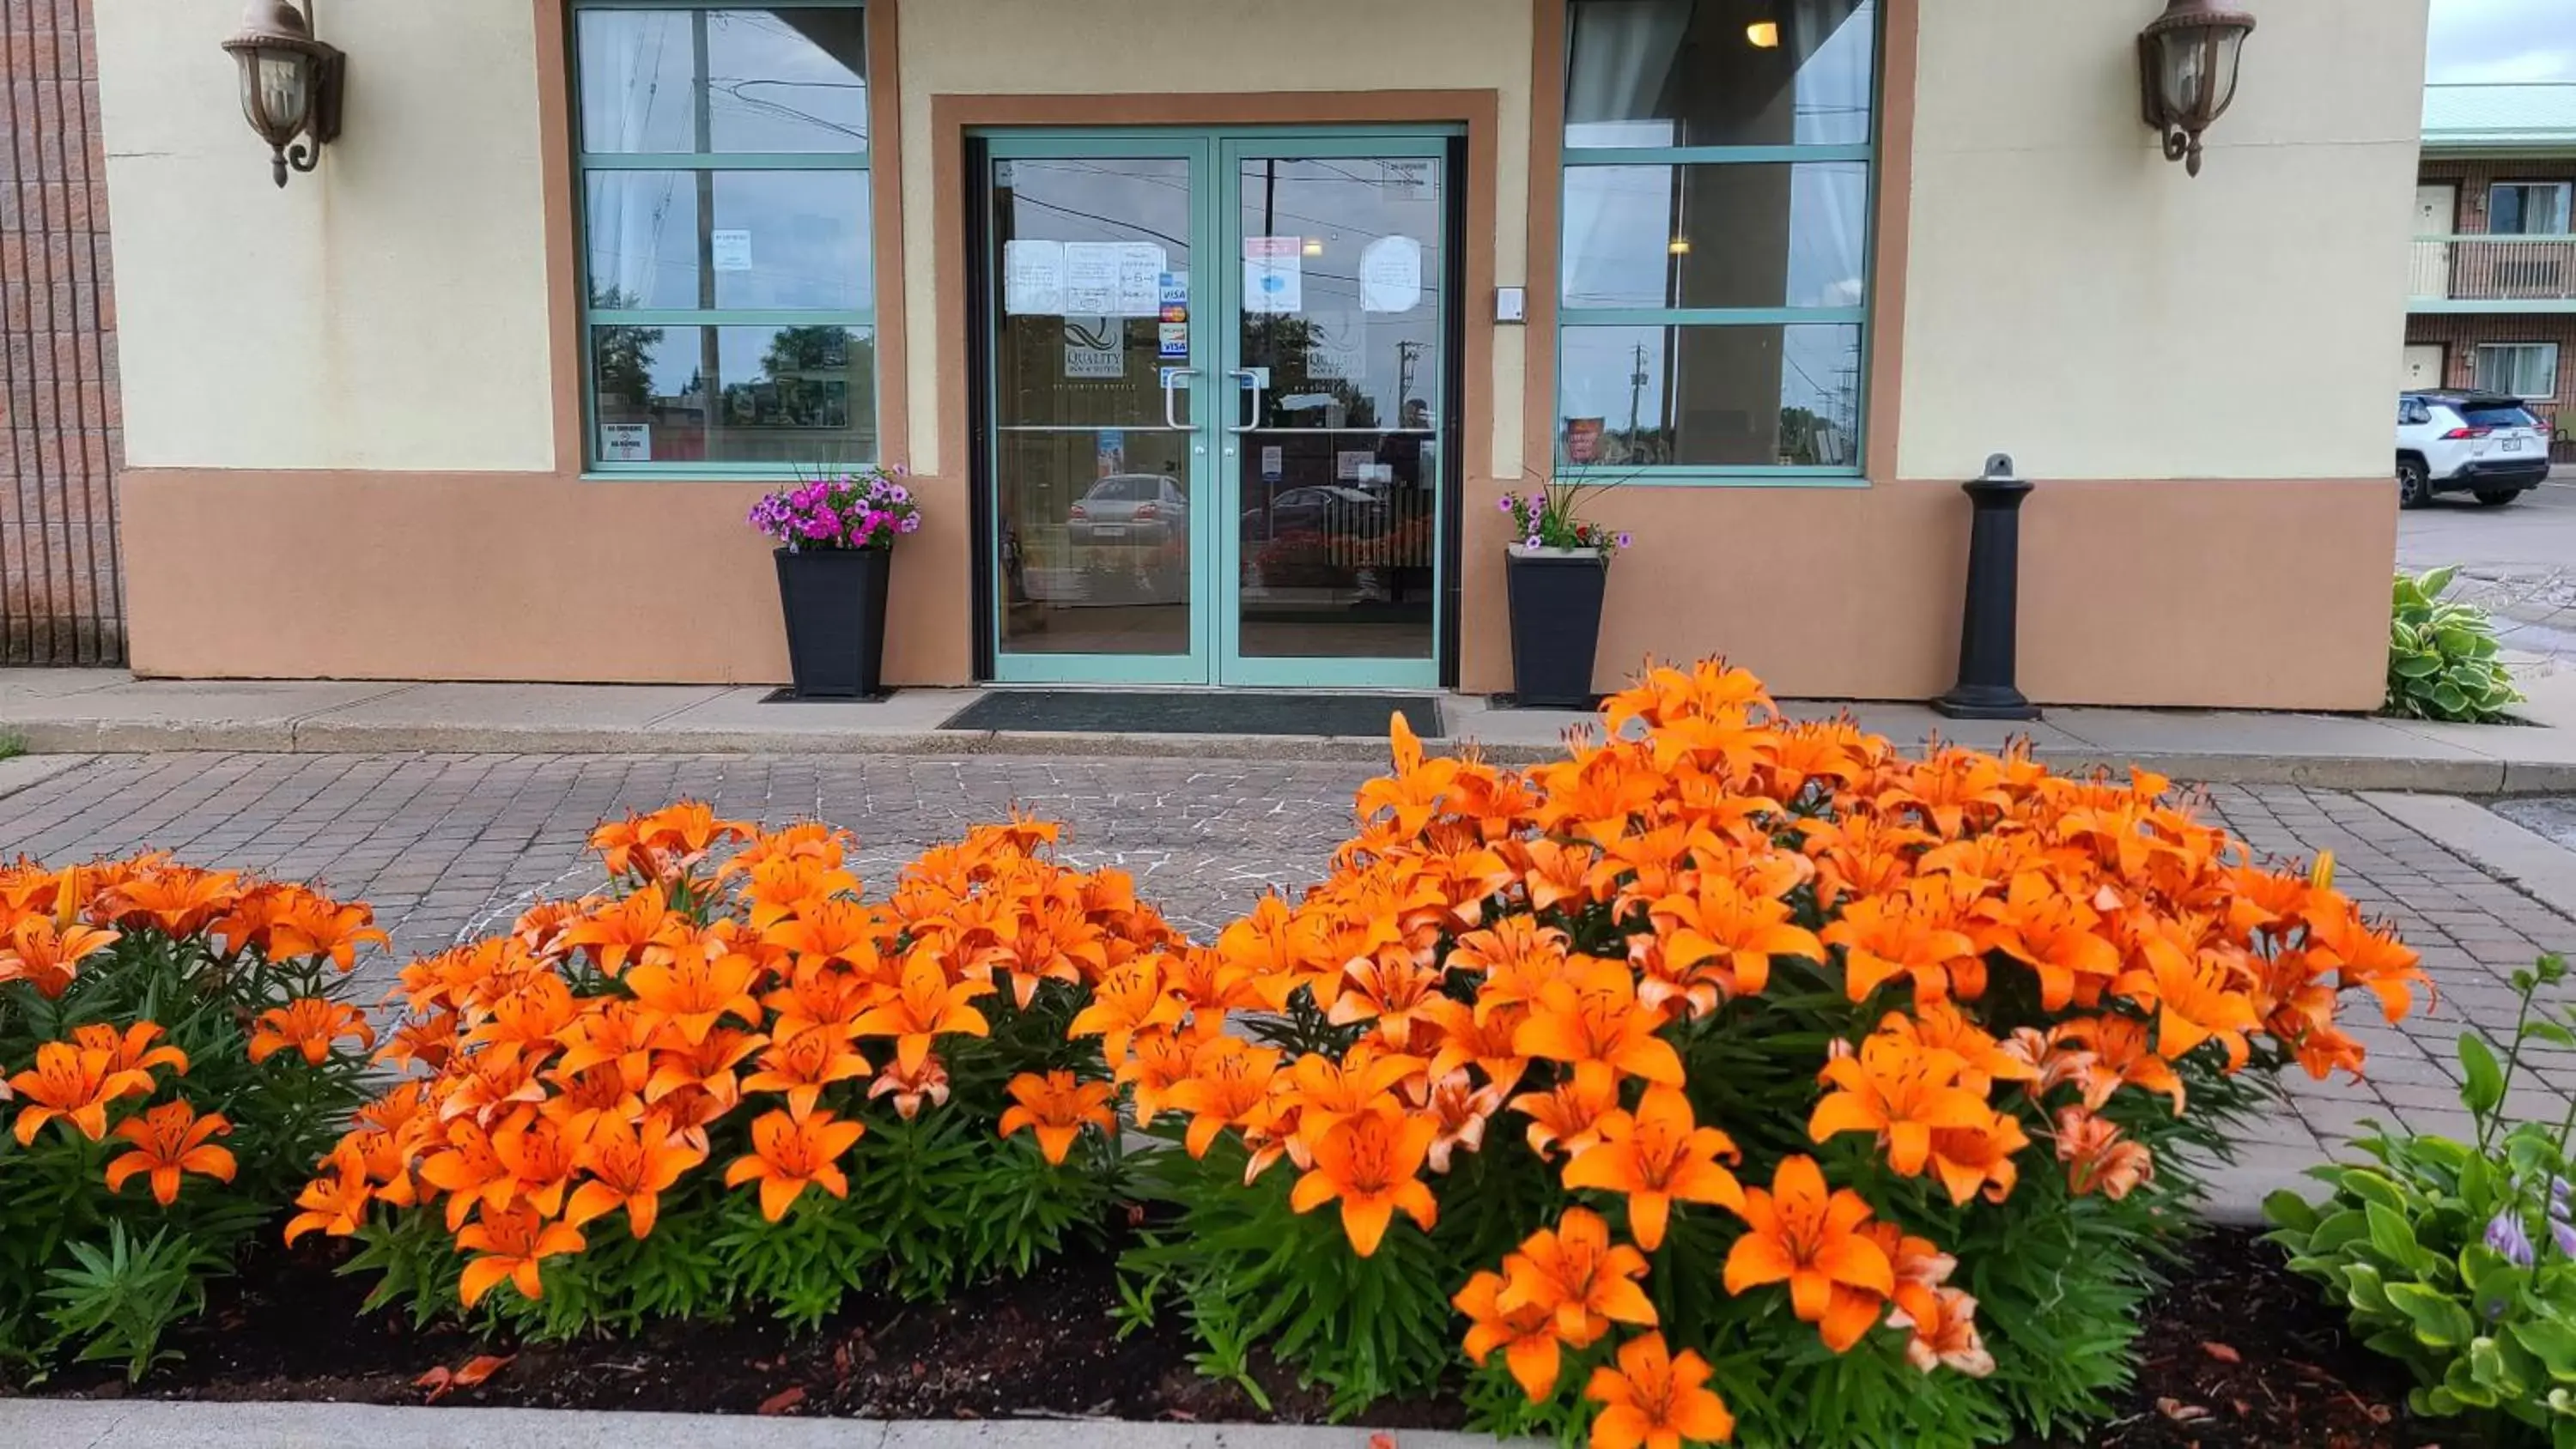 Property building in Quality Inn & Suites 1000 Islands